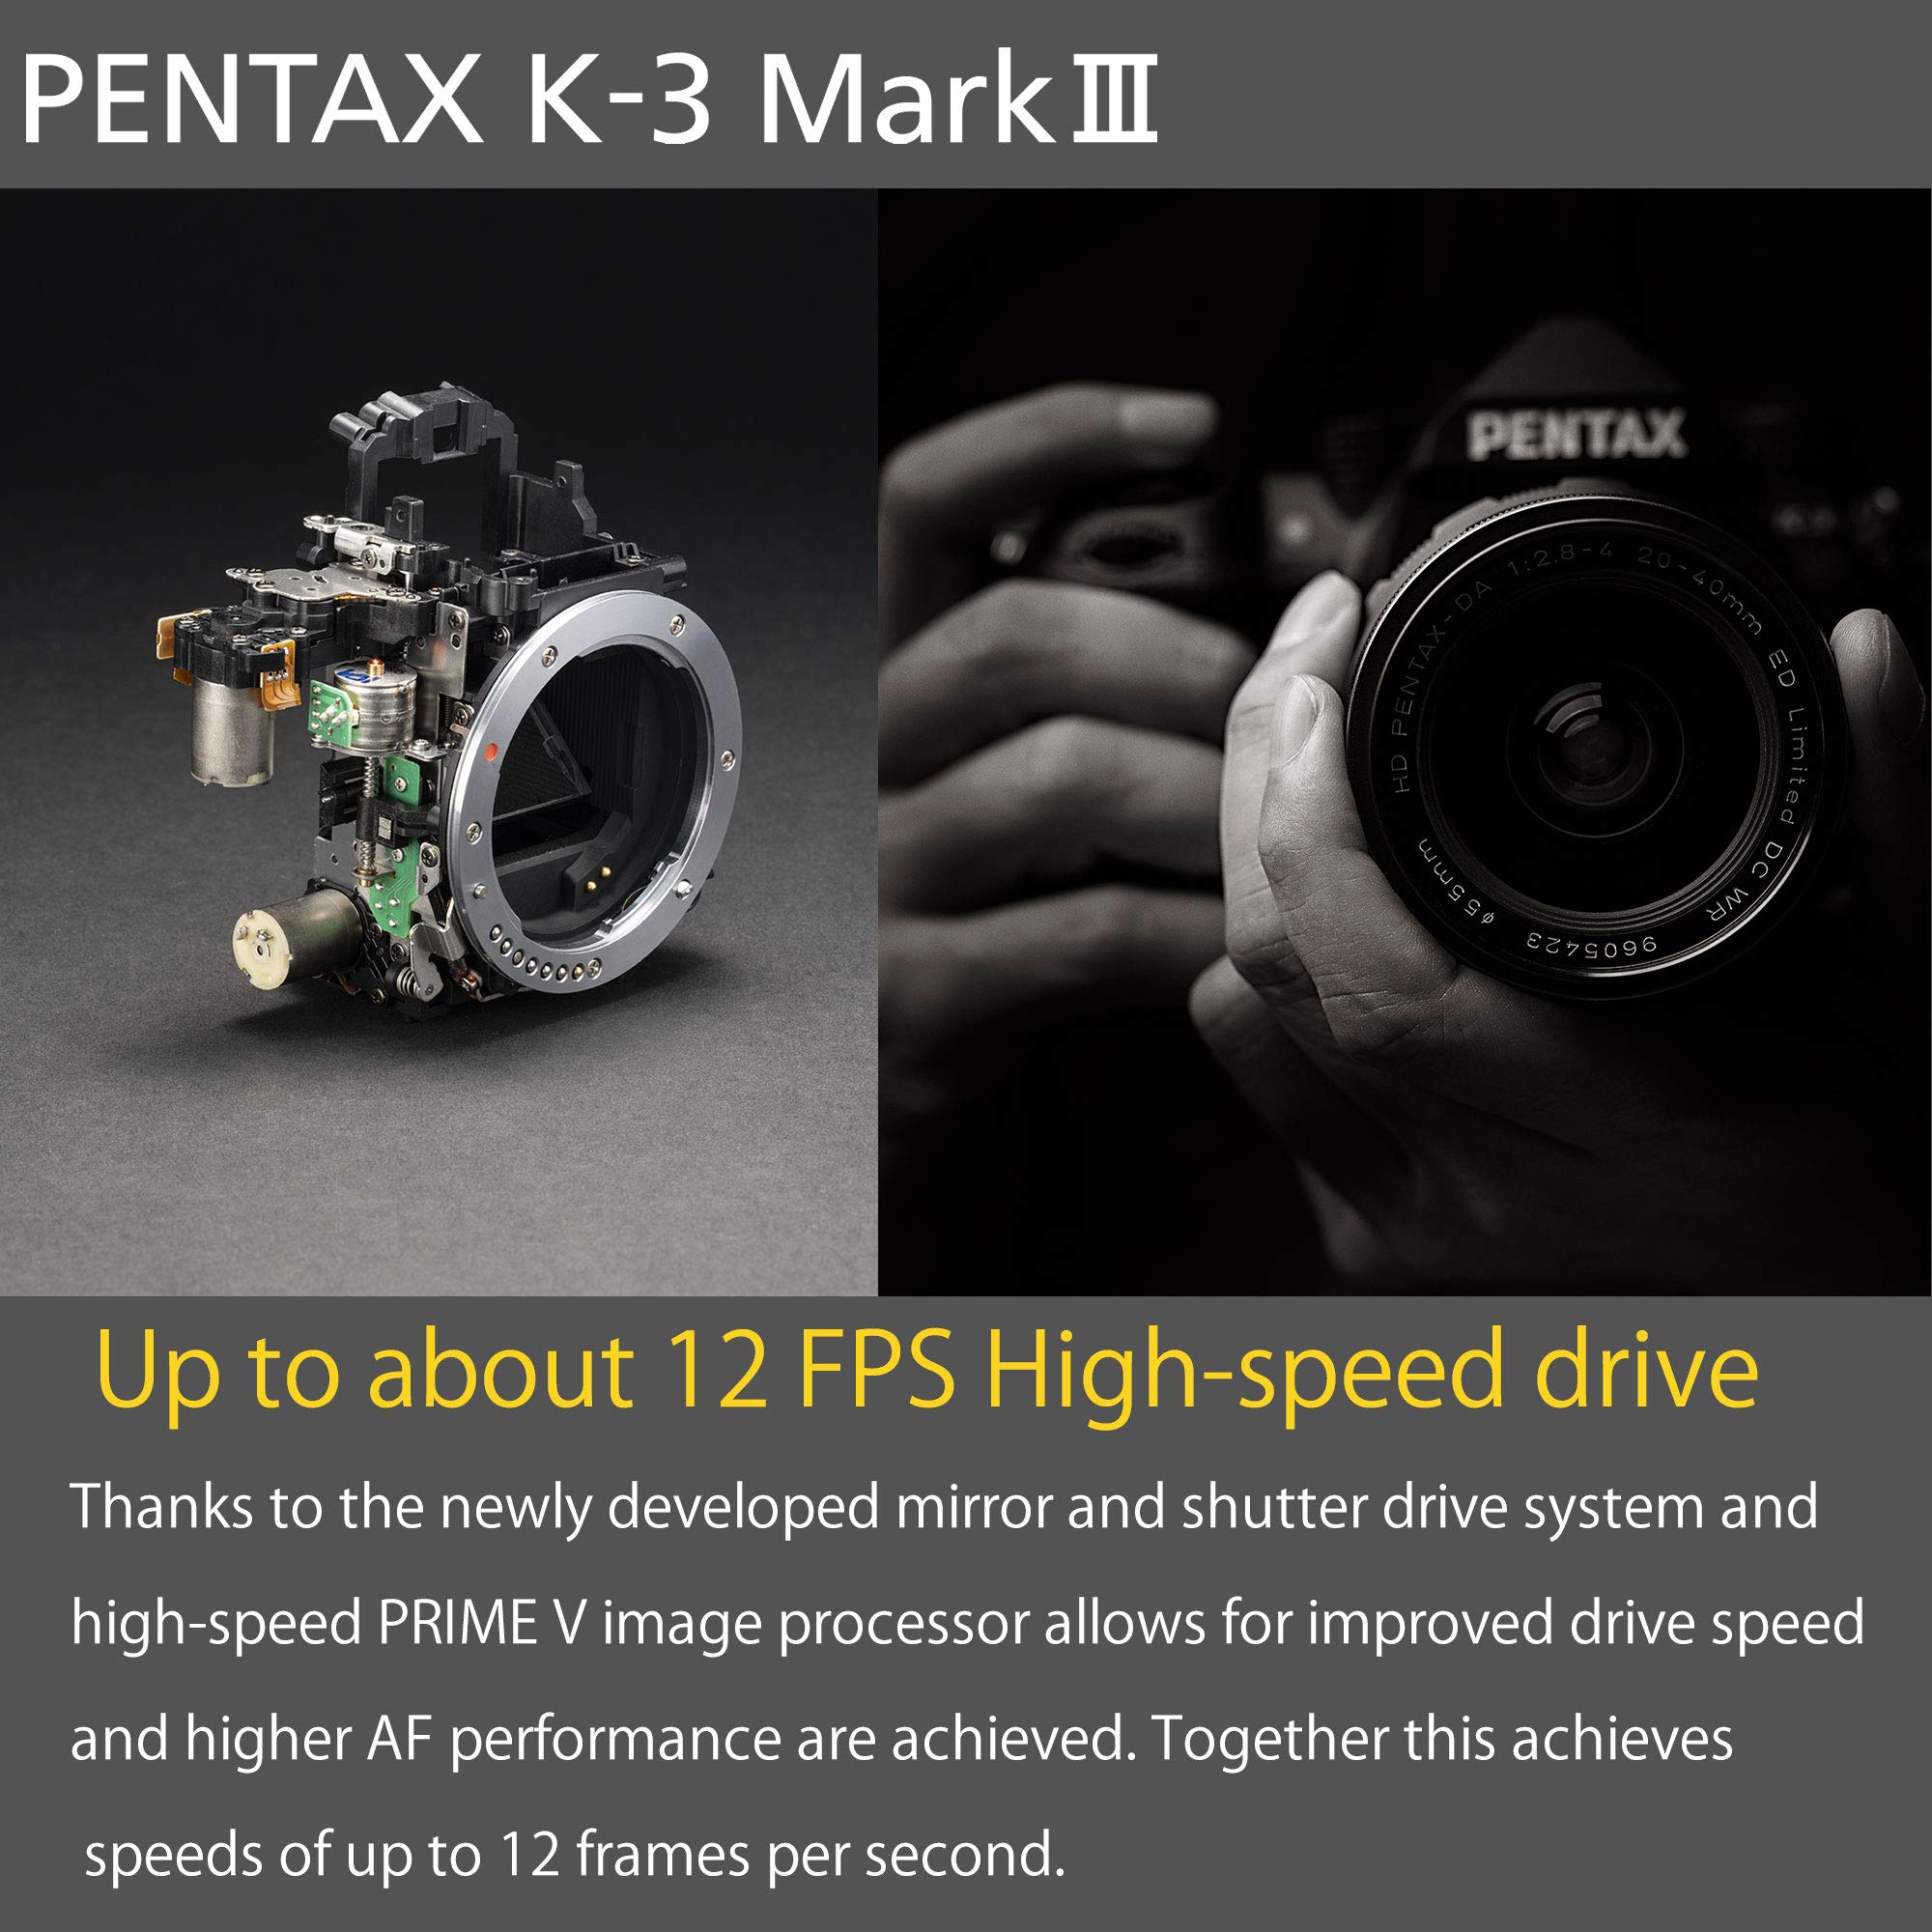 Pentax K-3 Mark III Flagship APS-C Black Camera Body - 12fps, Touch Screen LCD, Weather Resistant Magnesium Alloy Body with in-Body 5-Axis Shake Reduction. 1.05x Optical viewfinder with 100% FOV